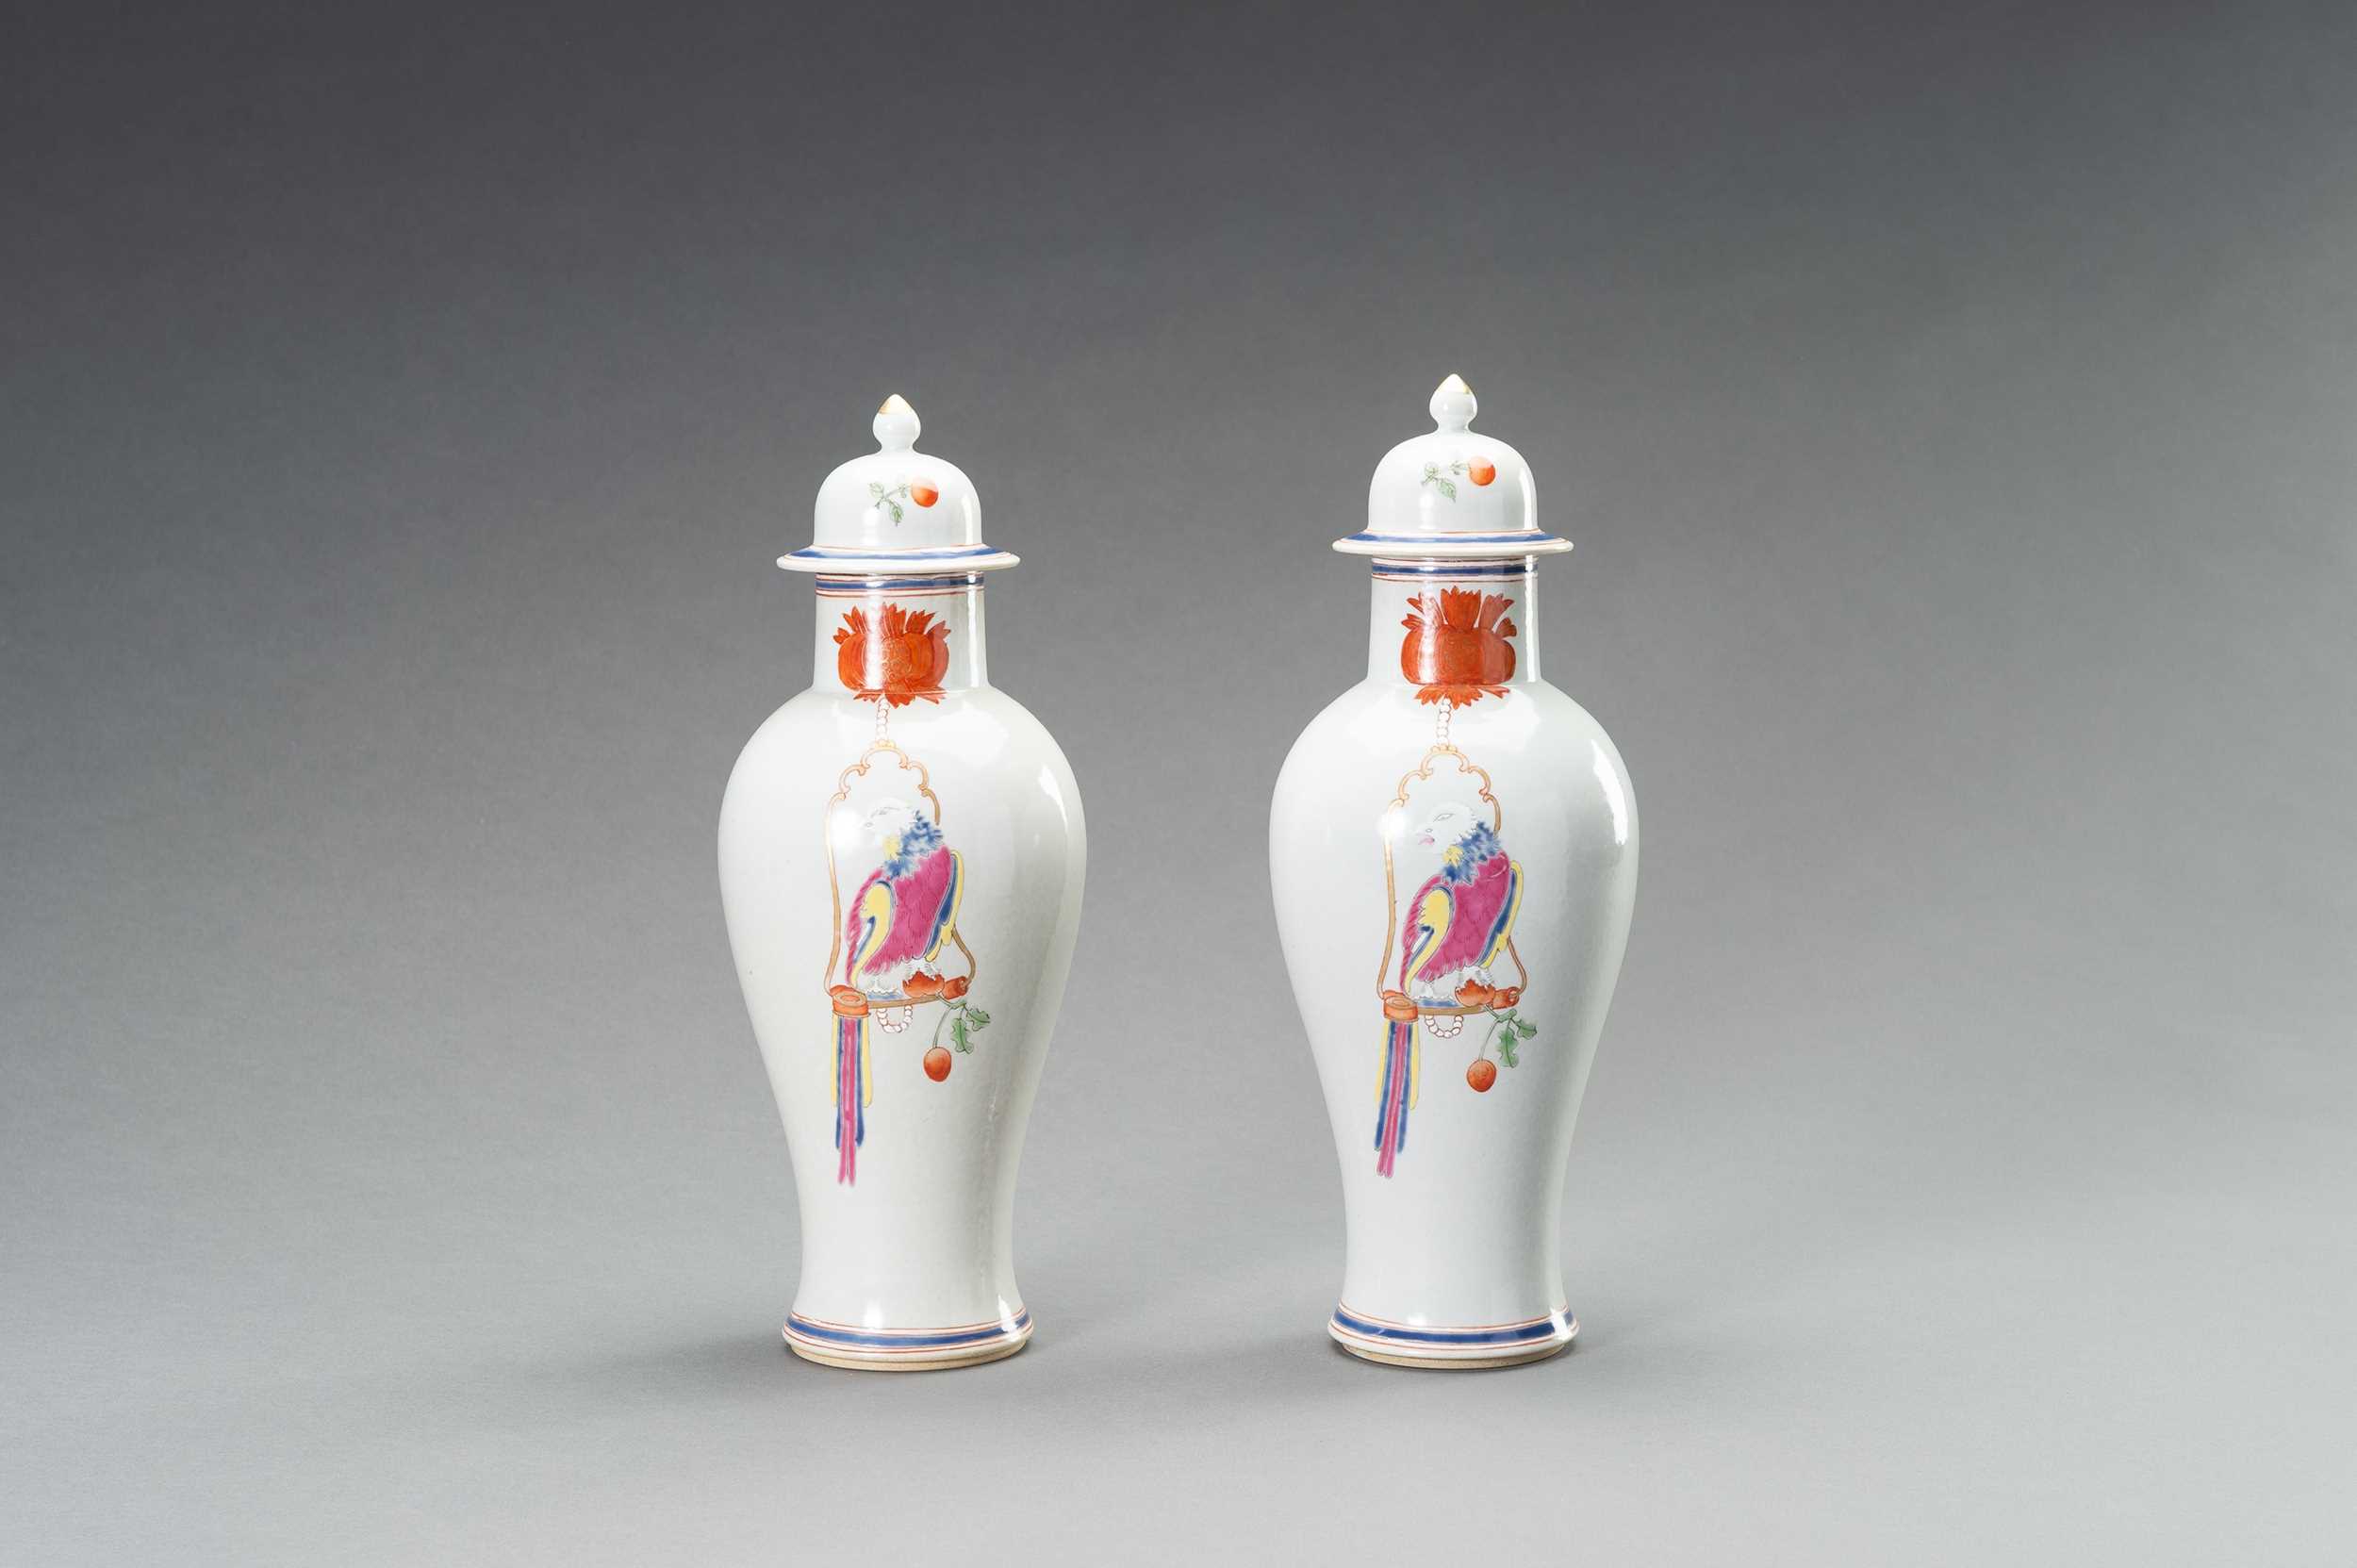 A PAIR OF FAMILLE ROSE ‘PARROT ON PERCH’ BALUSTER VASES, QING